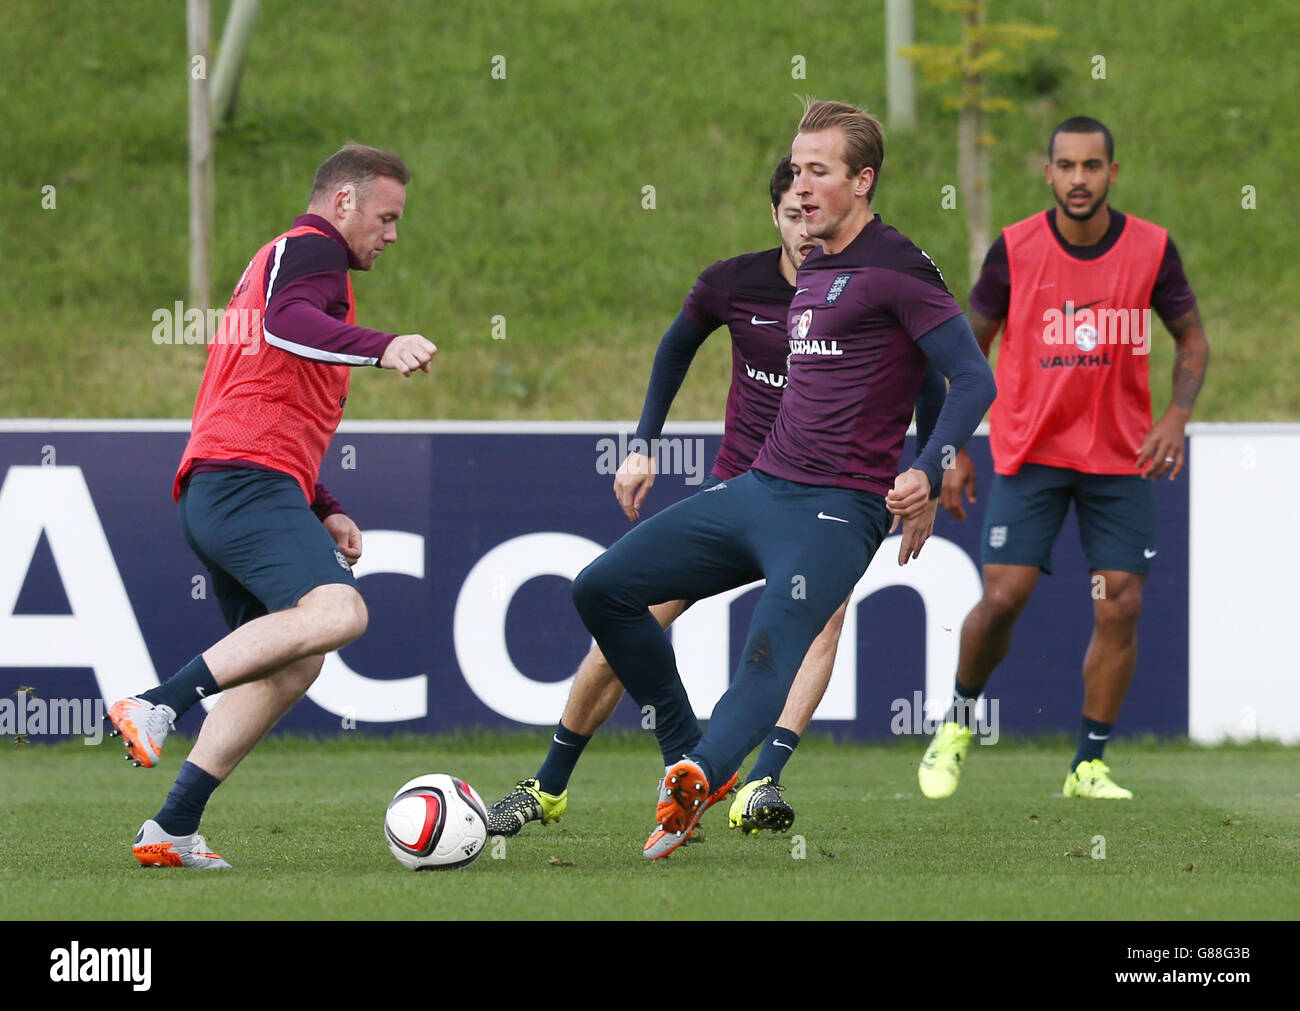 Football - UEFA Euro 2016 - Qualifications - Groupe E - San Marino v Angleterre Angleterre - Session de formation - Jour deux - St George's Park Banque D'Images